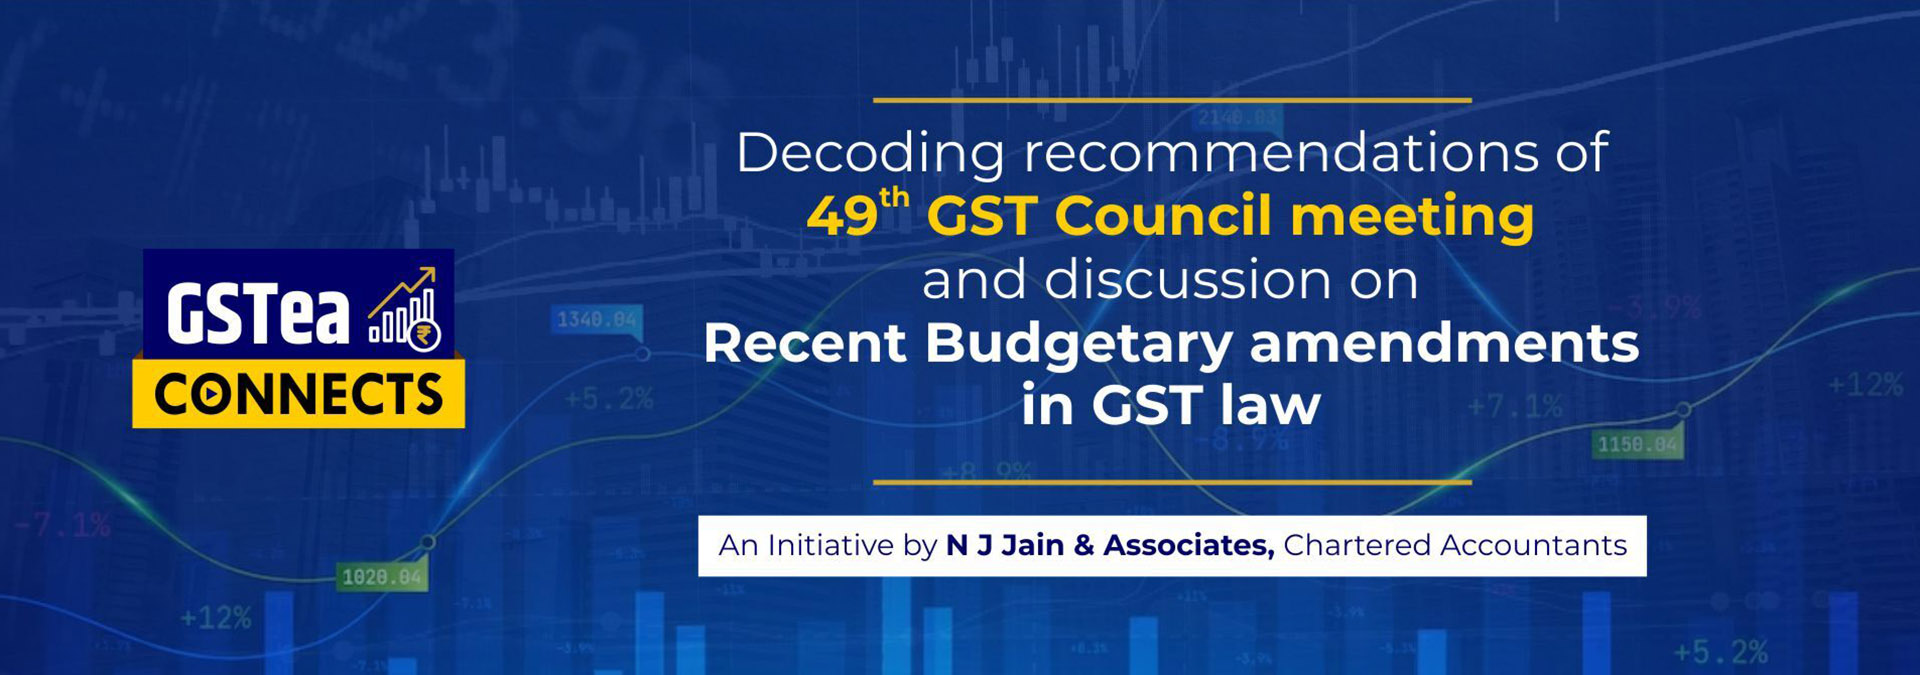 Decoding Recommendations of 49th GST Council Meeting and Discussion on Recent Budgetary Amendments in GST Law